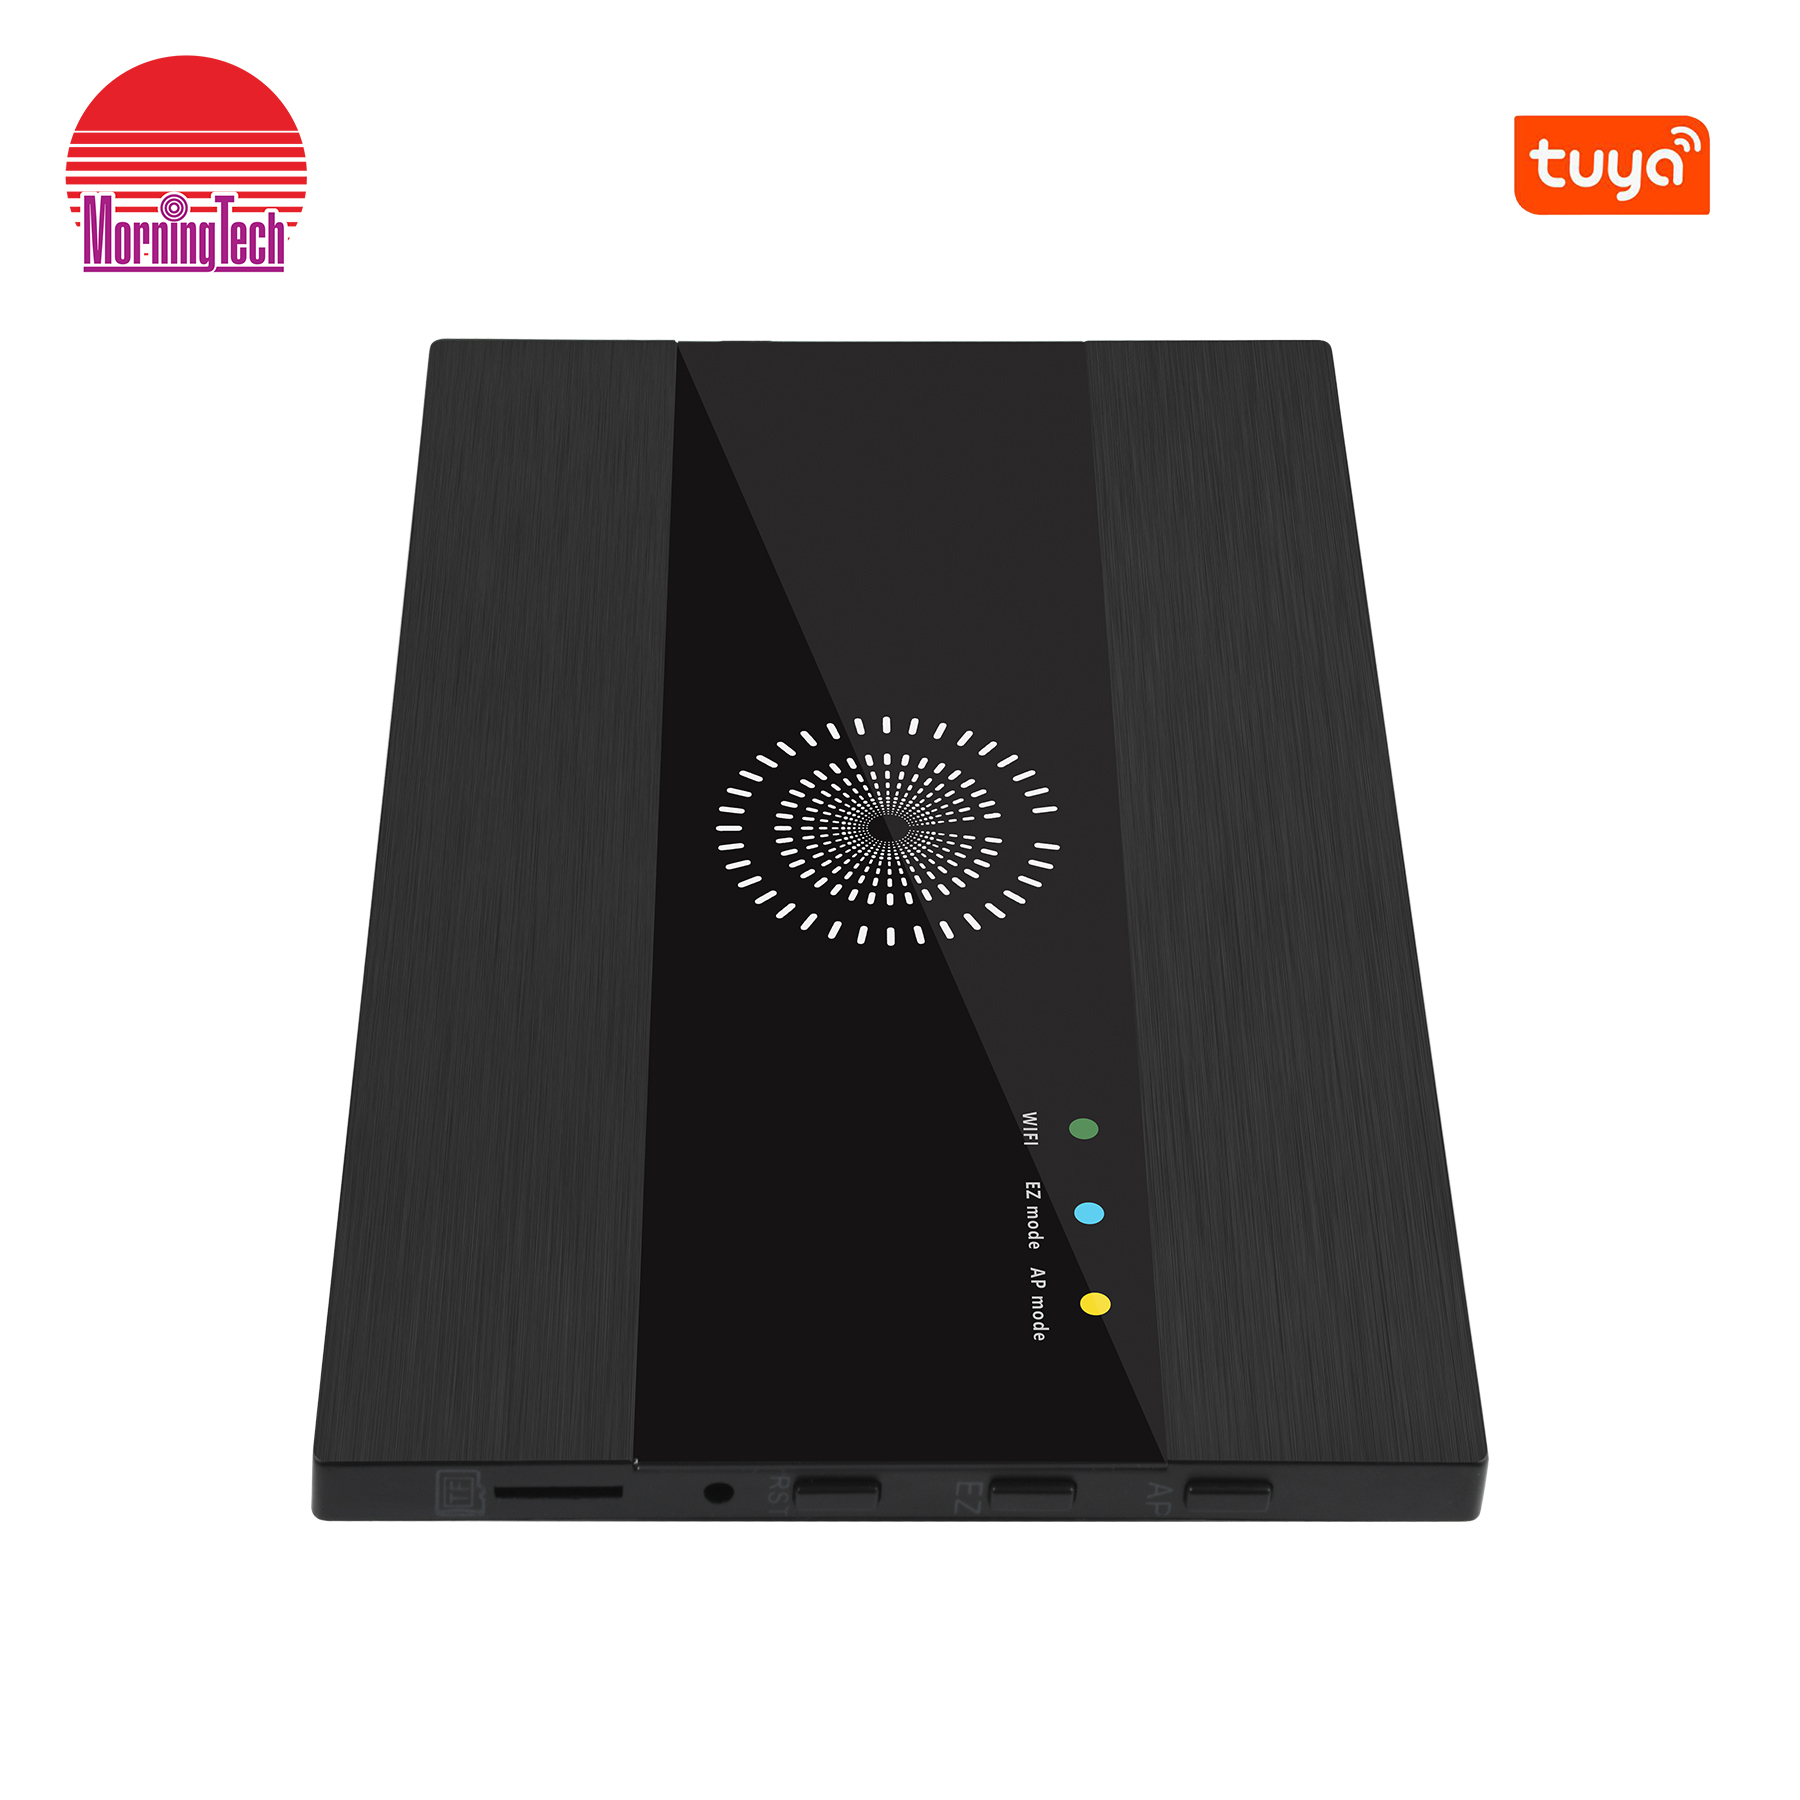 95230HP wifi Video door bell tuya devices for connecting old items achieve mobile phone remote control function